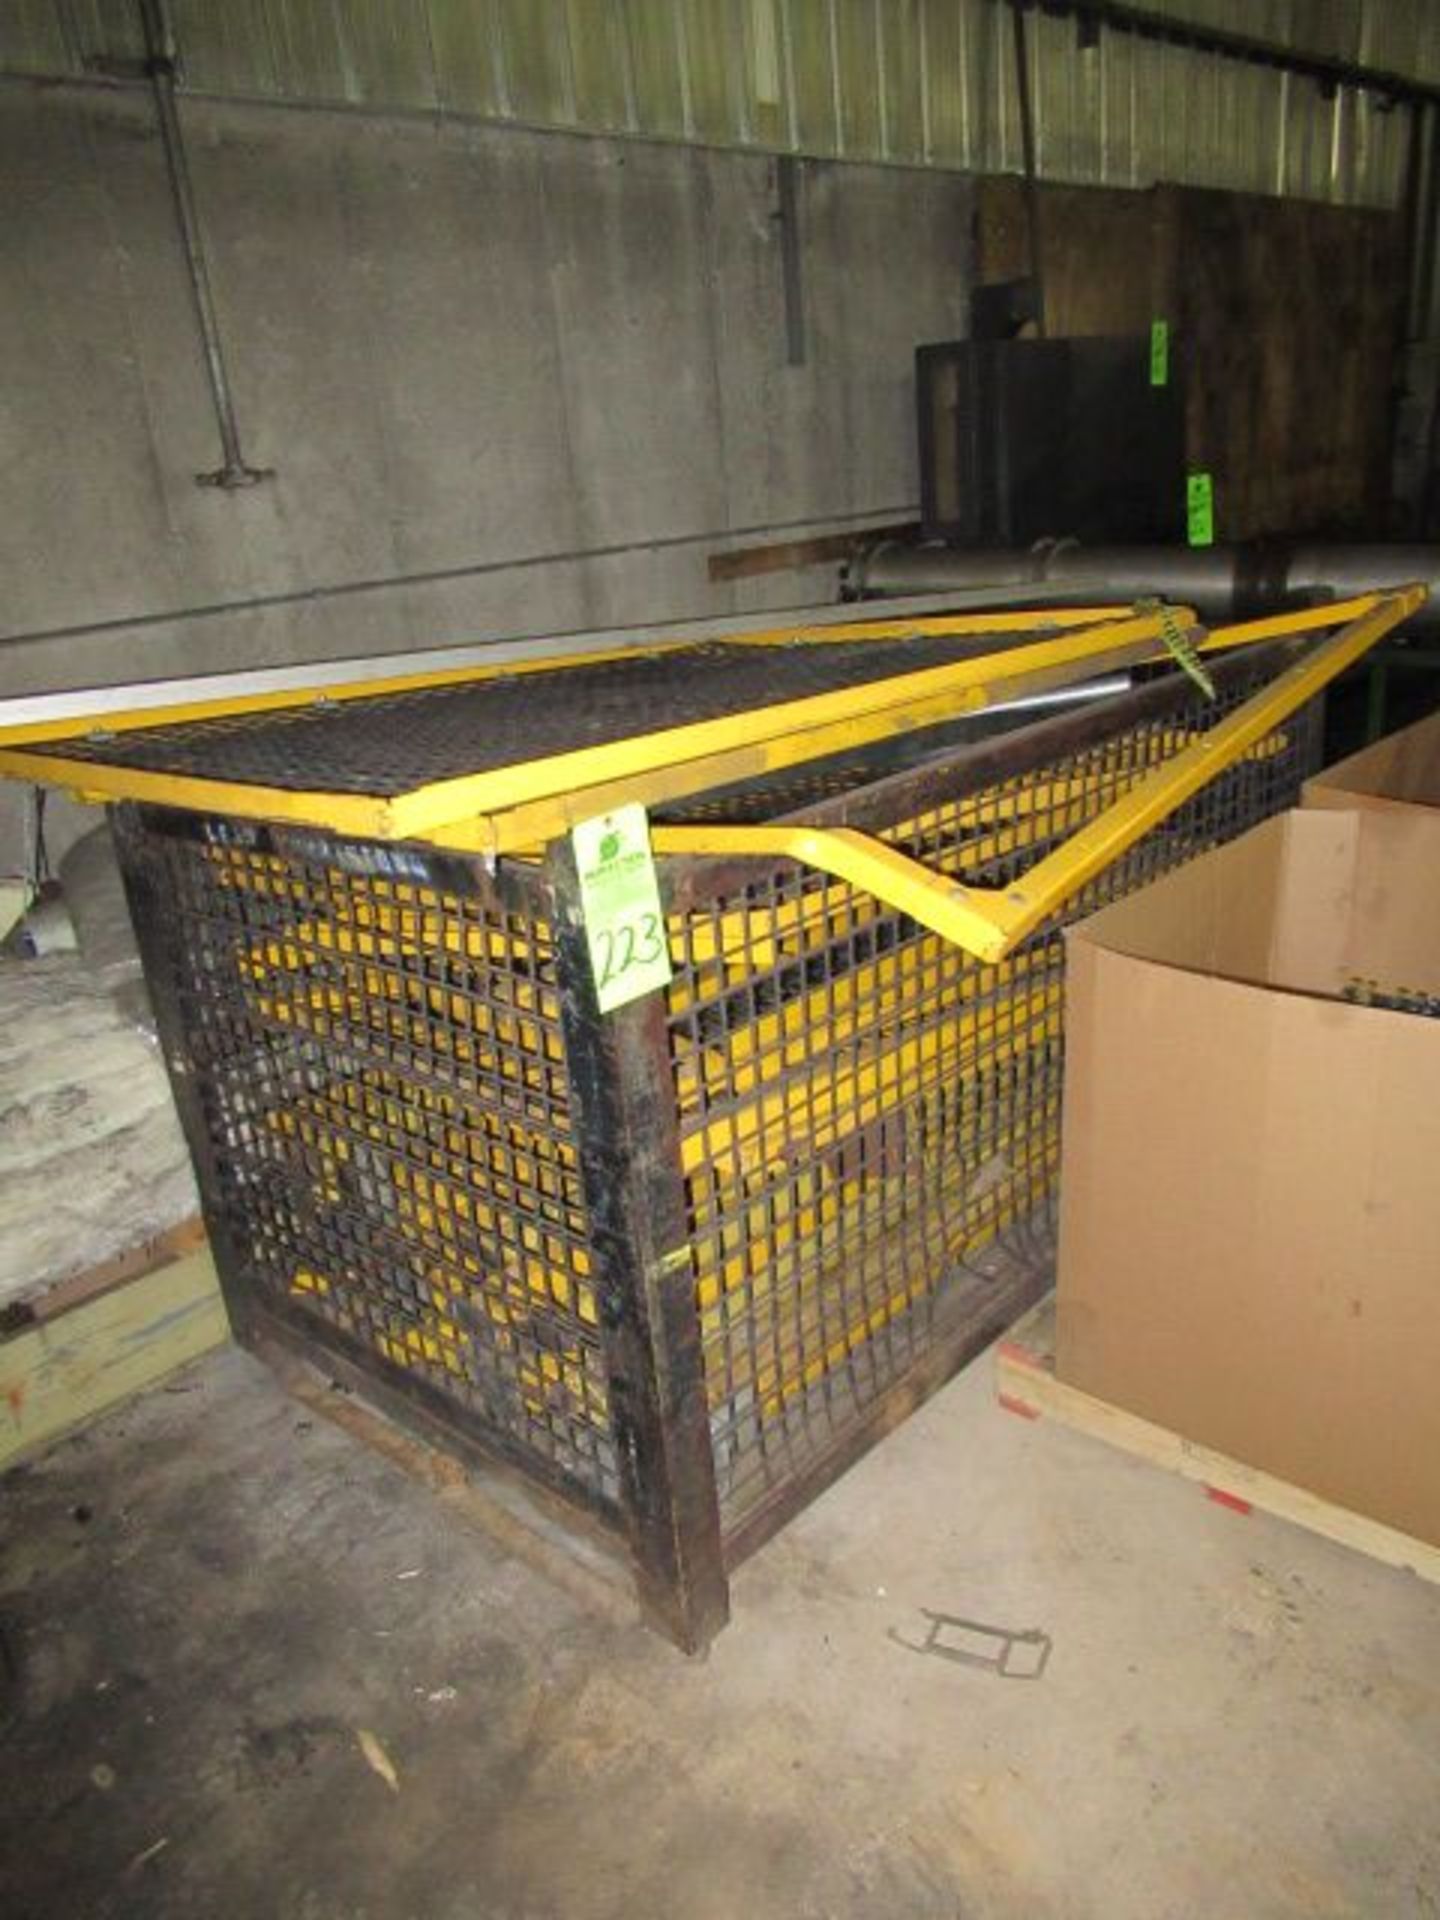 Machine Safety Cage Dismantled In Basket ($50 Rigging Cost) - Image 2 of 2